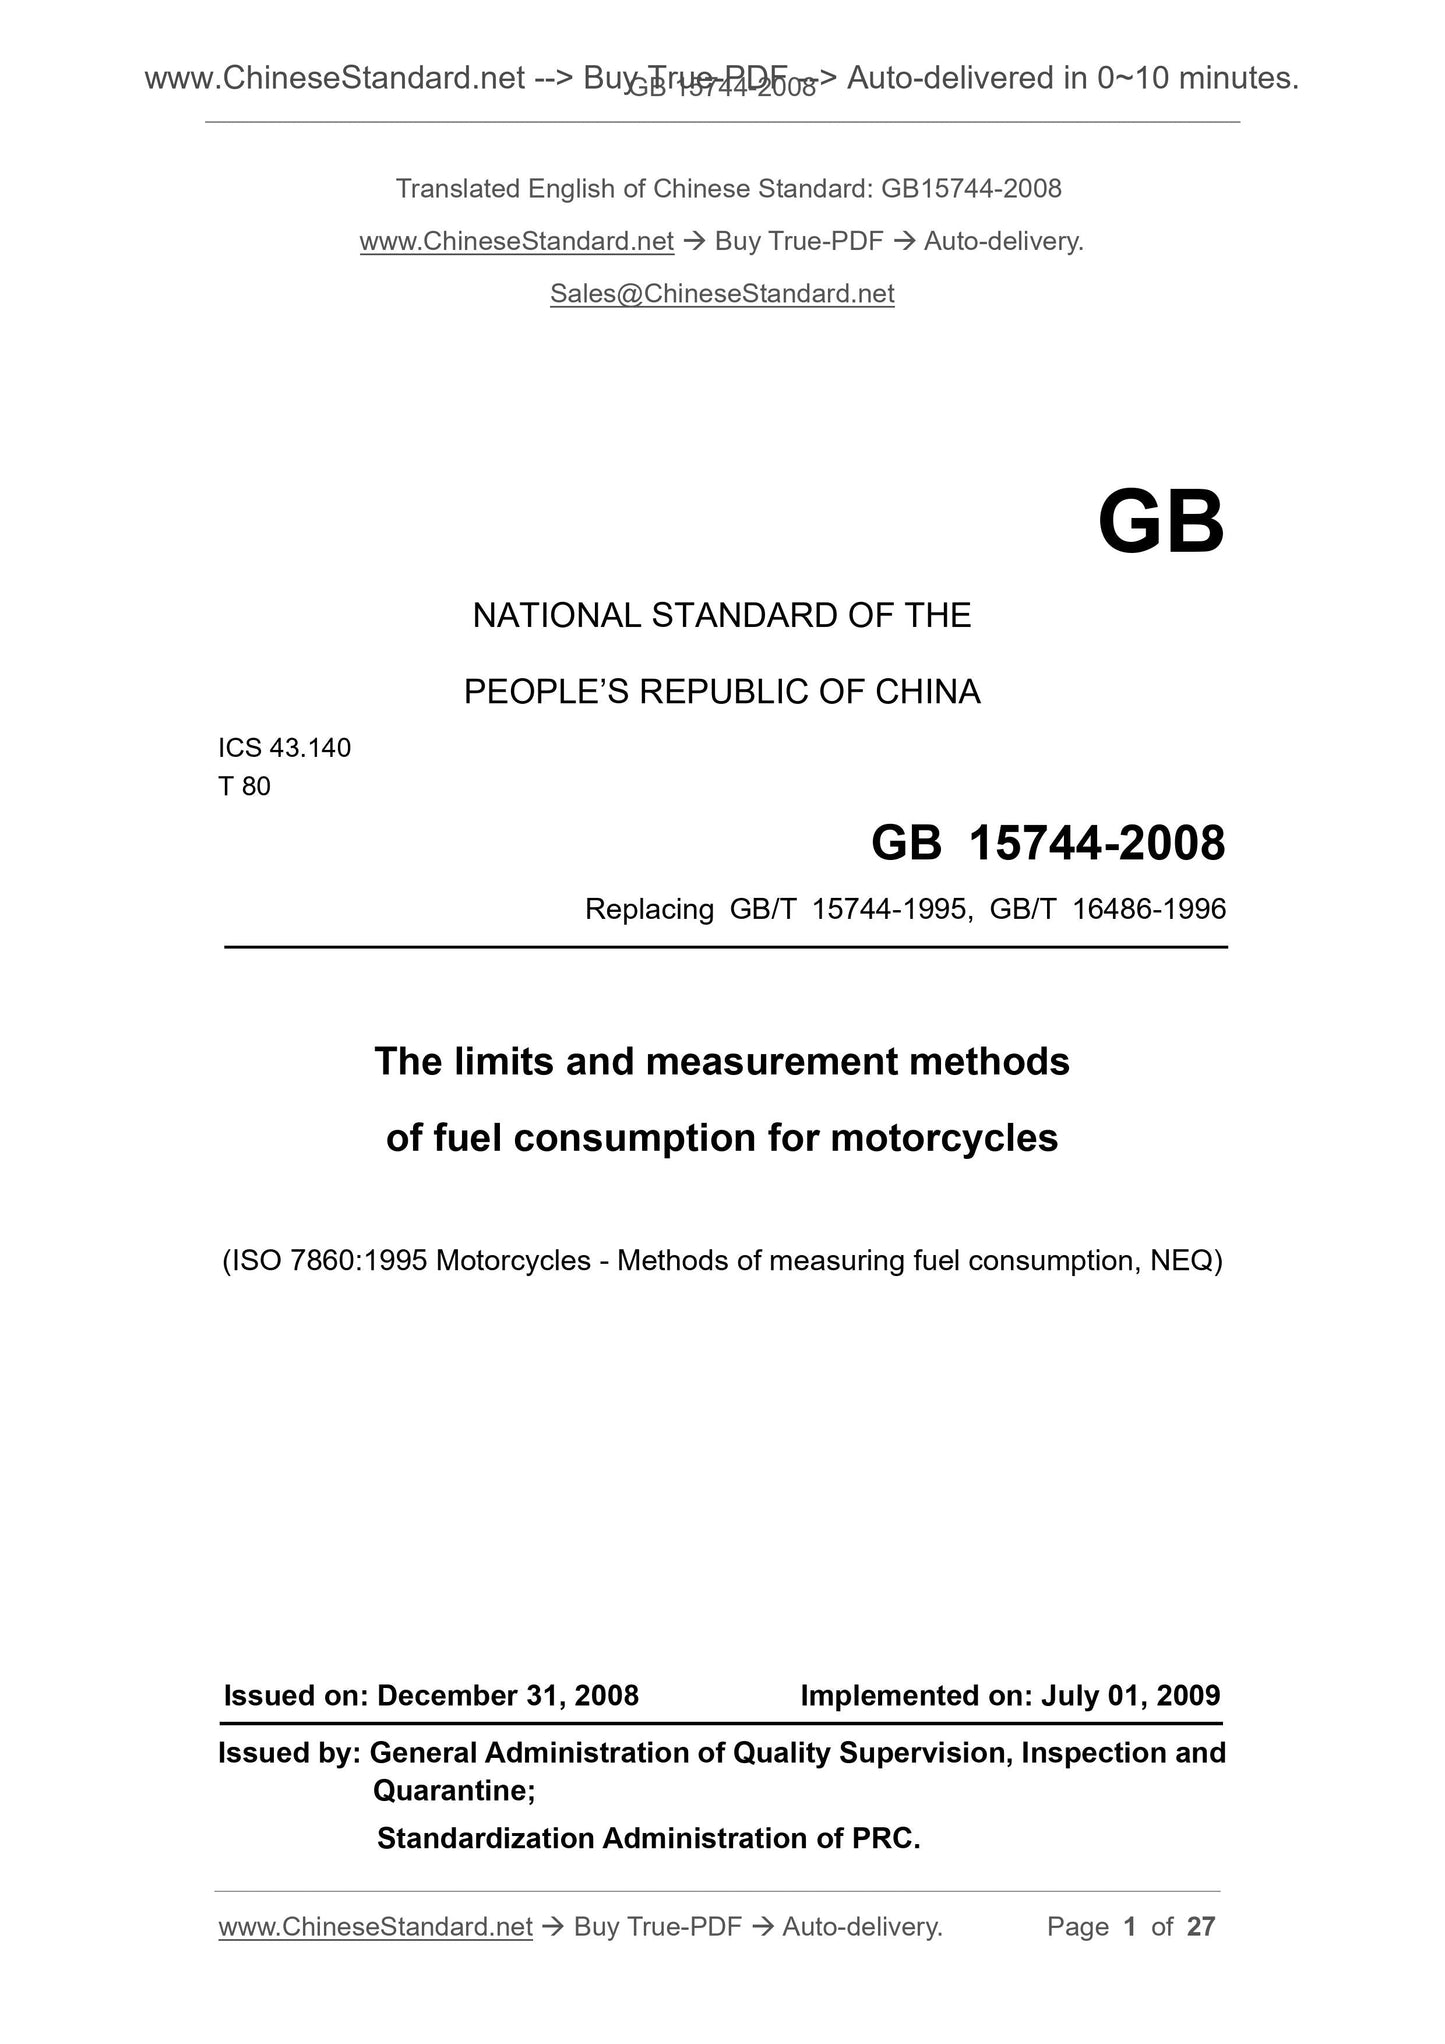 GB 15744-2008 Page 1